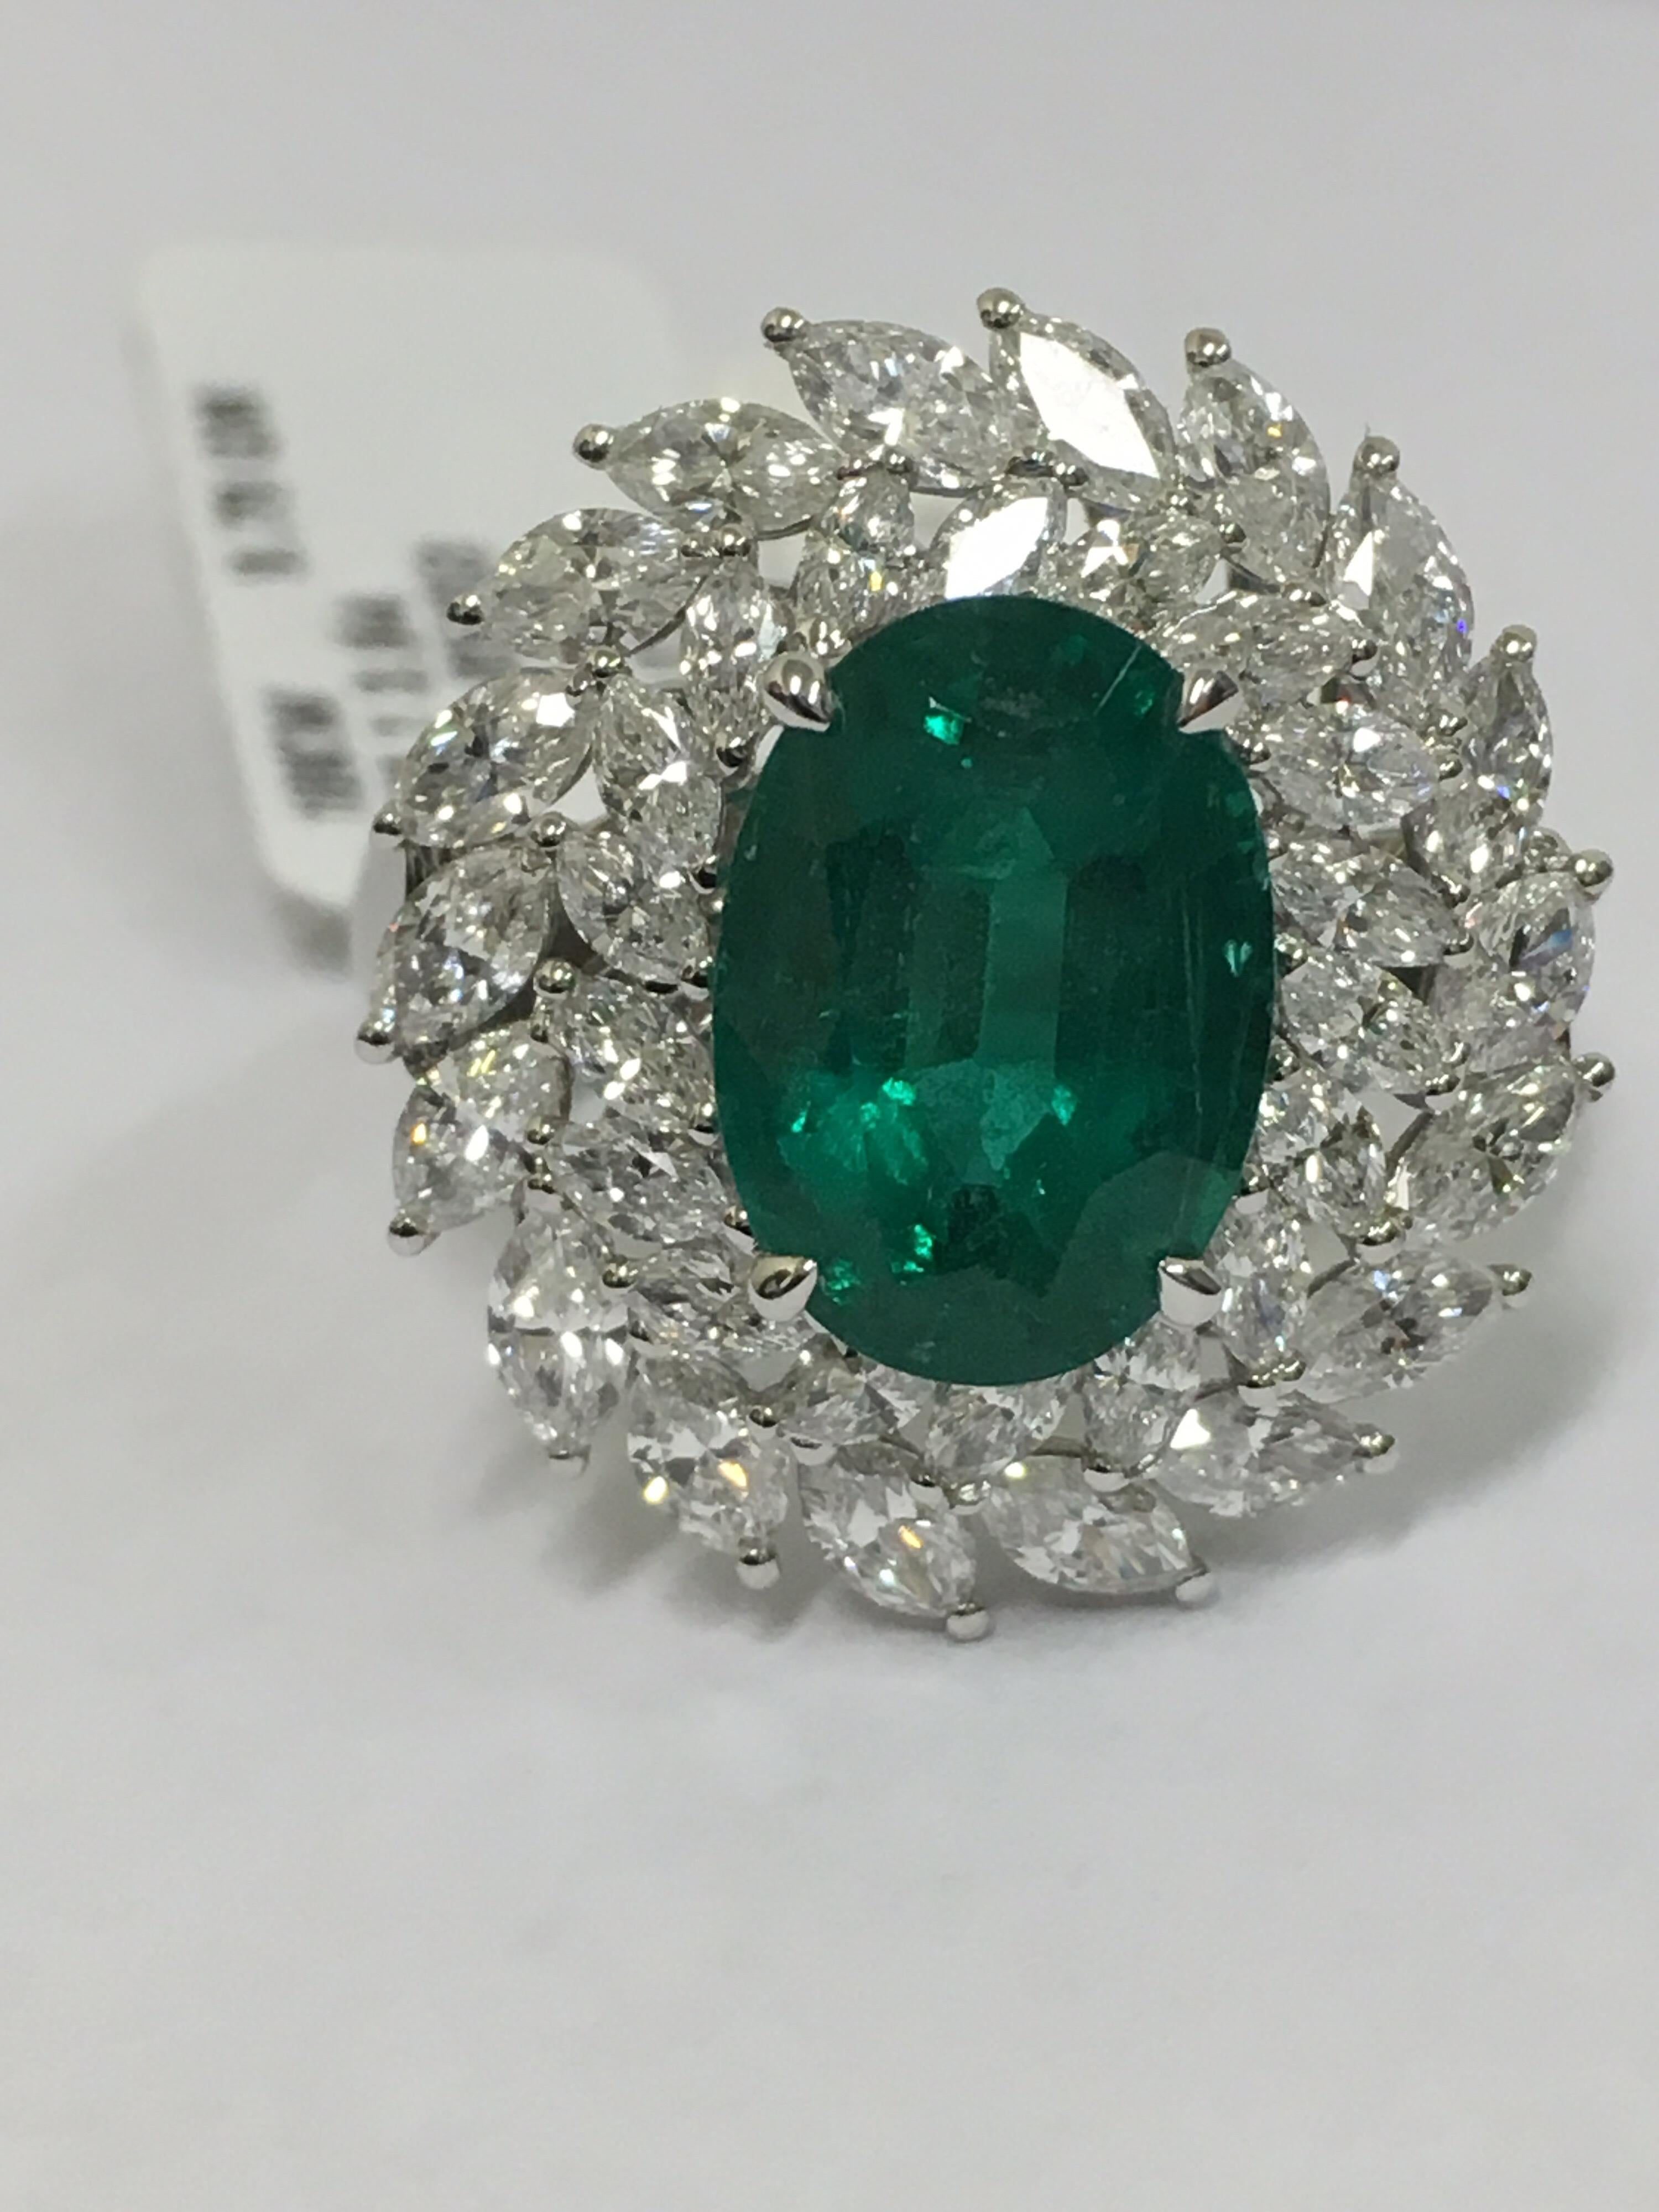 Natural Colombian Emerald weight 3.84 Carat.
Marquise shape 18 piece which weigh 1.57 Carat (Bigger Marquise)
Marquise Shape 18 Piece which is 0.68 Carat (Smaller Marquise)
The Ring is set in 18 Karat White Gold.
Total Gold is 9.79 Gram.
The ring is